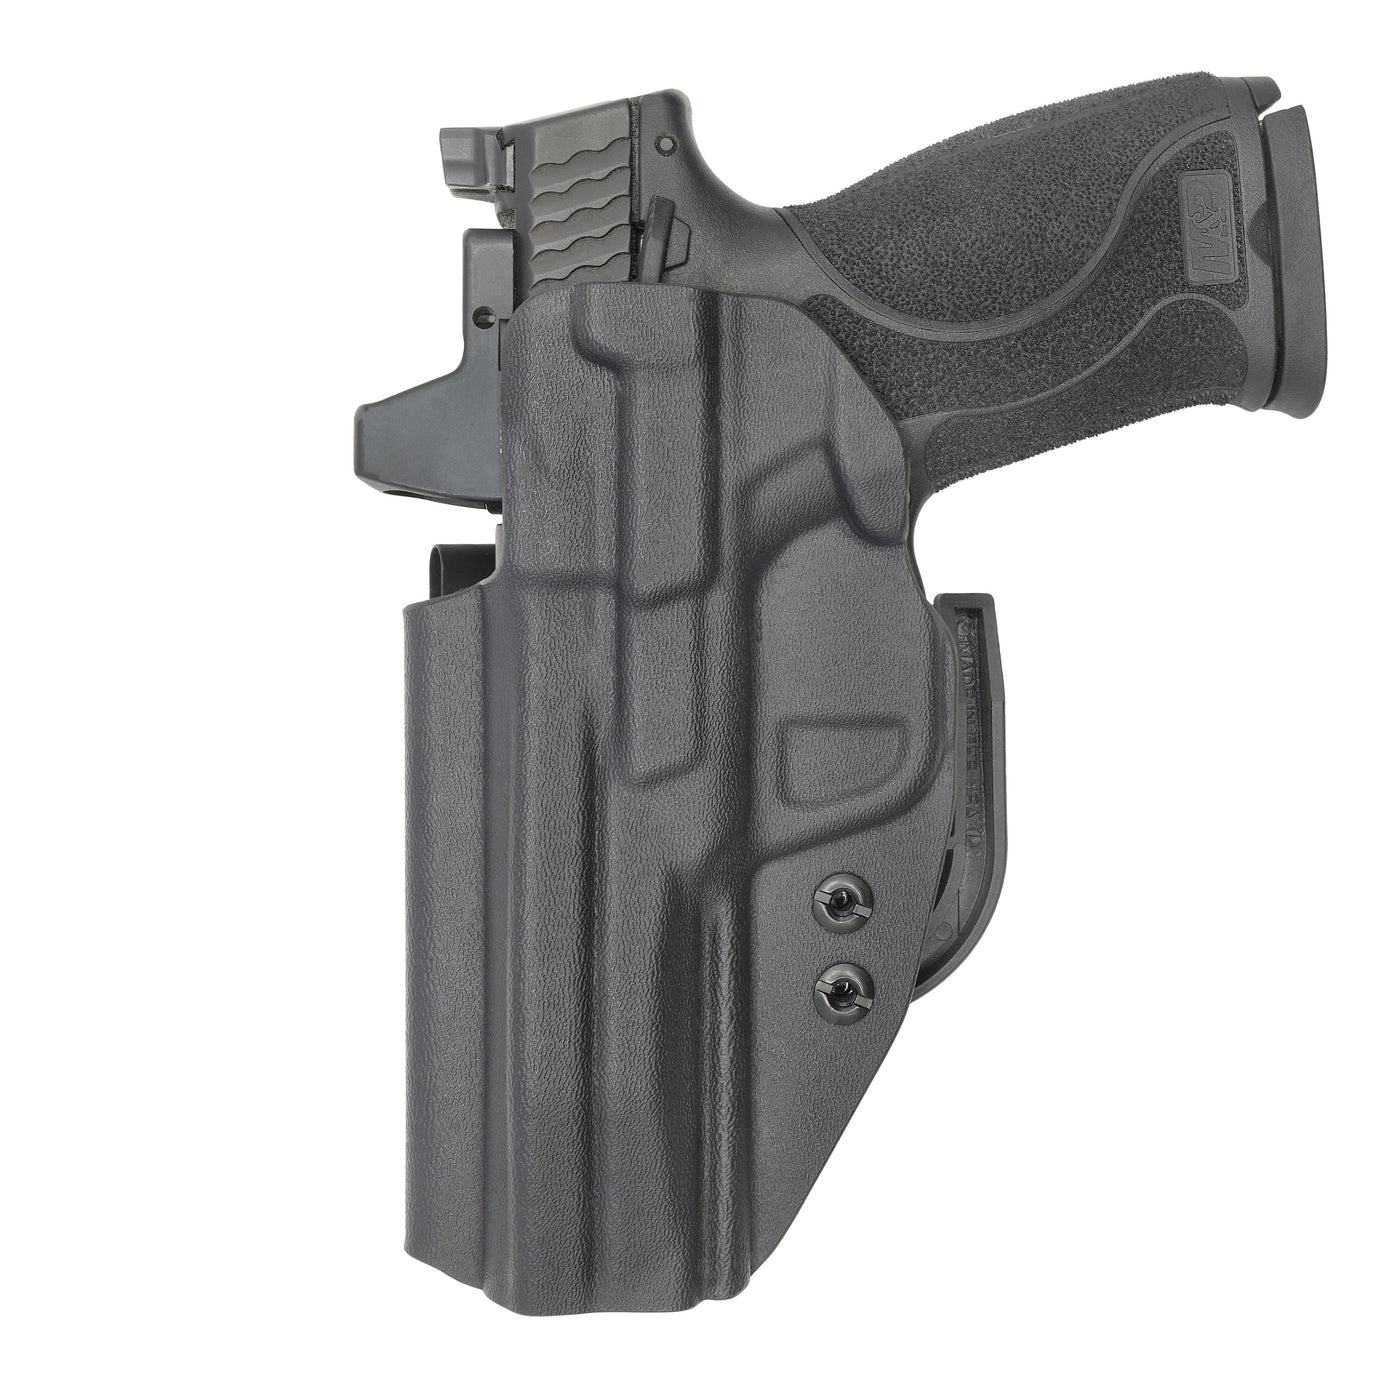 C&G Holsters quickship IWB ALPHA UPGRADE Covert M&P 10/45 4.6" in holstered position back view